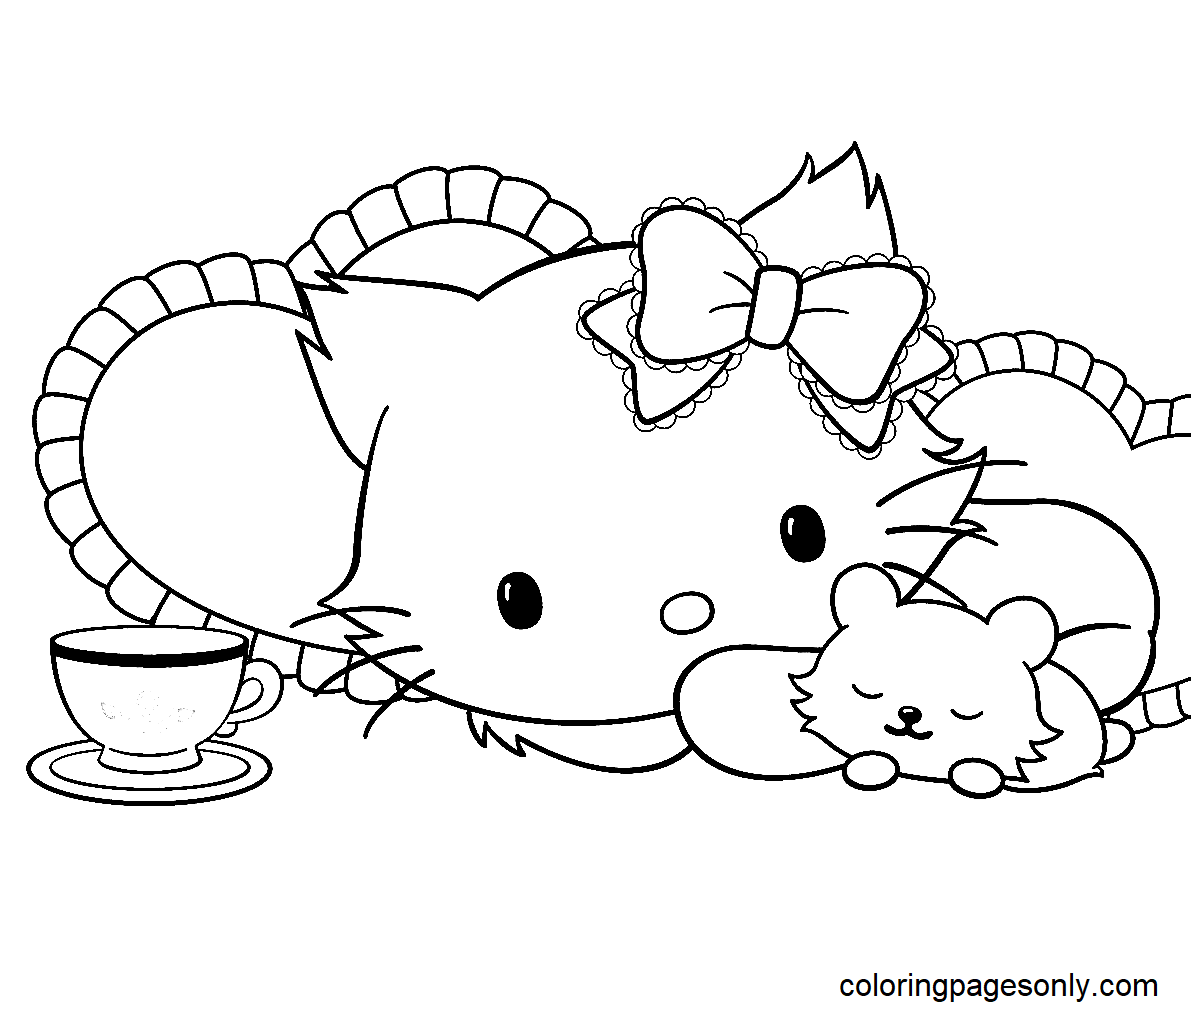 Charmmy Kitty and Friend Coloring Page